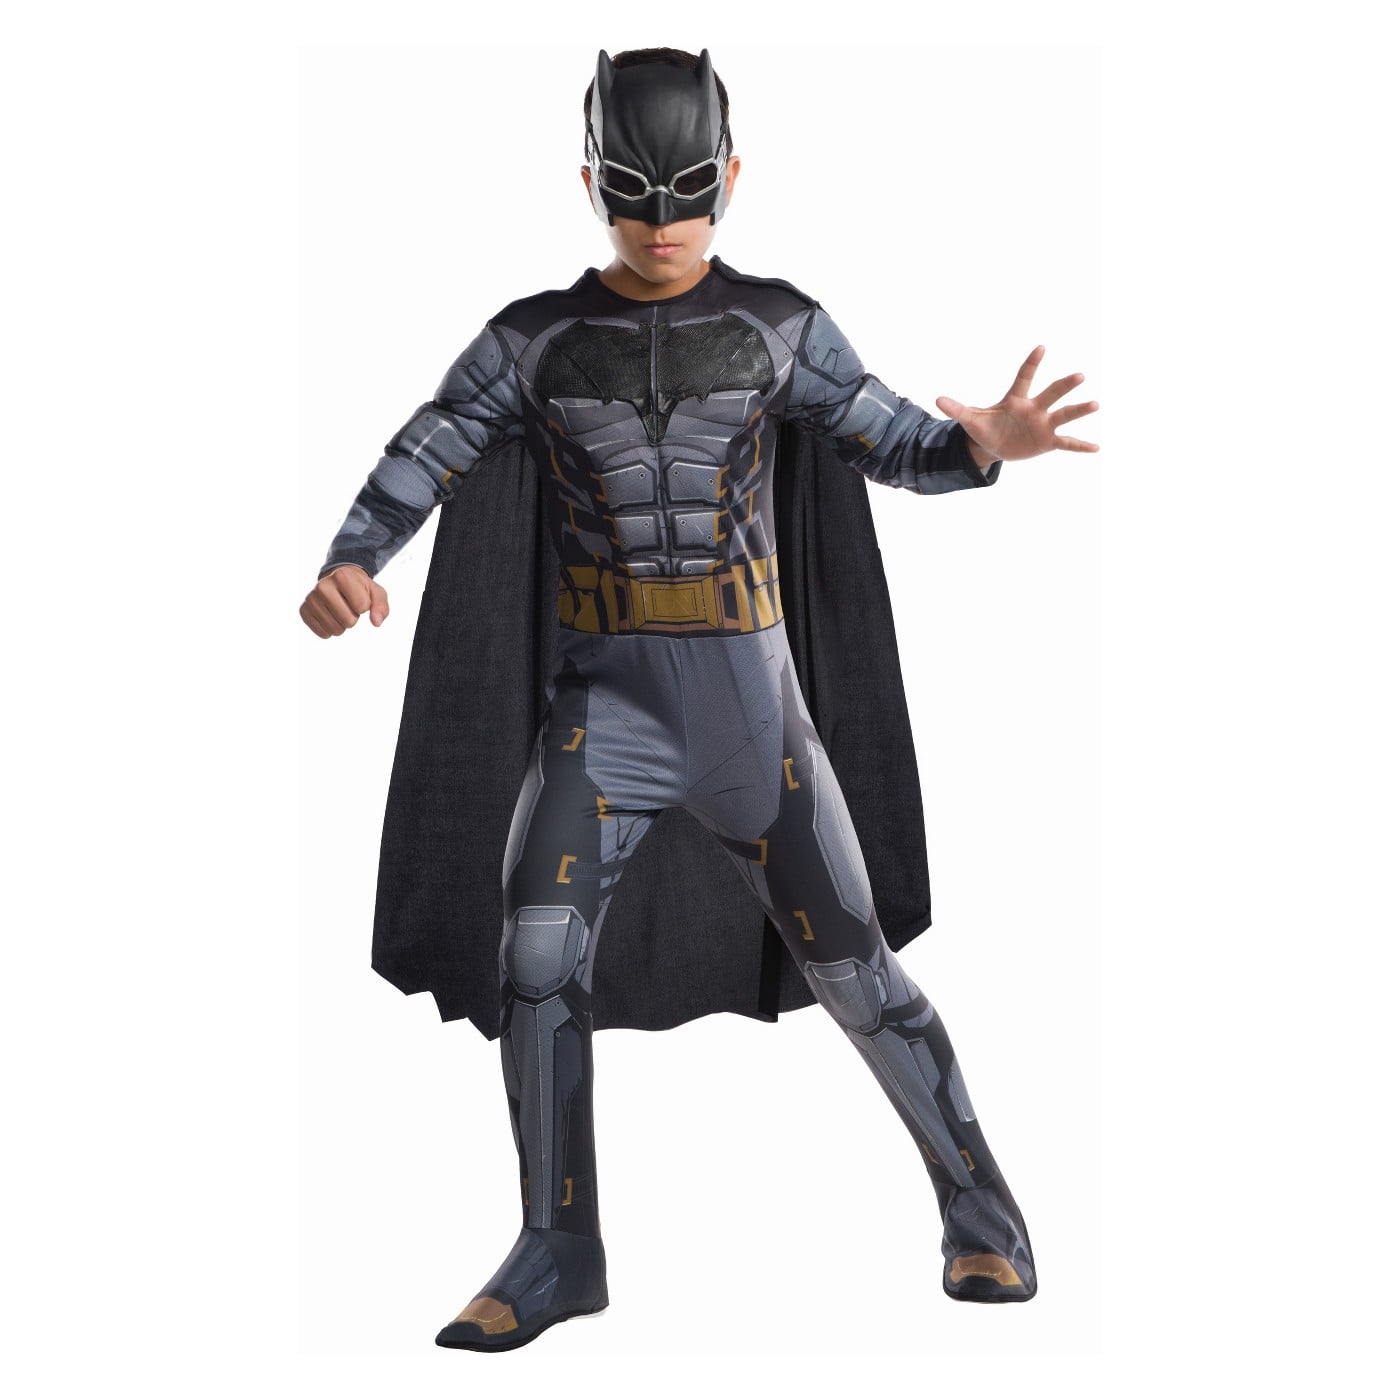 justice league costume for kids